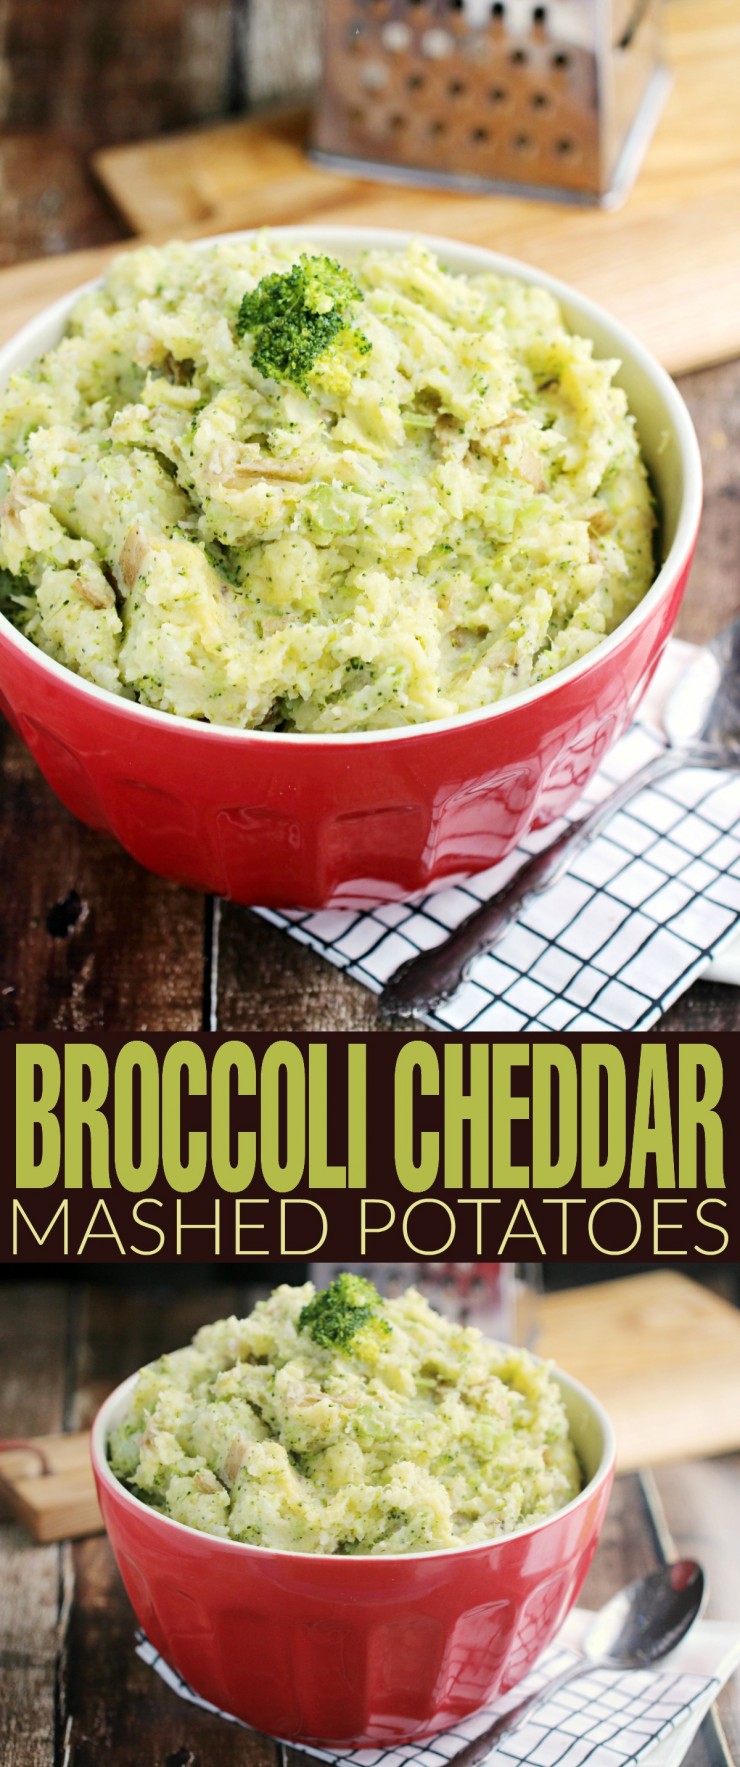 These Broccoli Cheddar Mashed Potatoes pairs a perfect veggie combo with mashed potatoes for a comforting side dish with a twist!